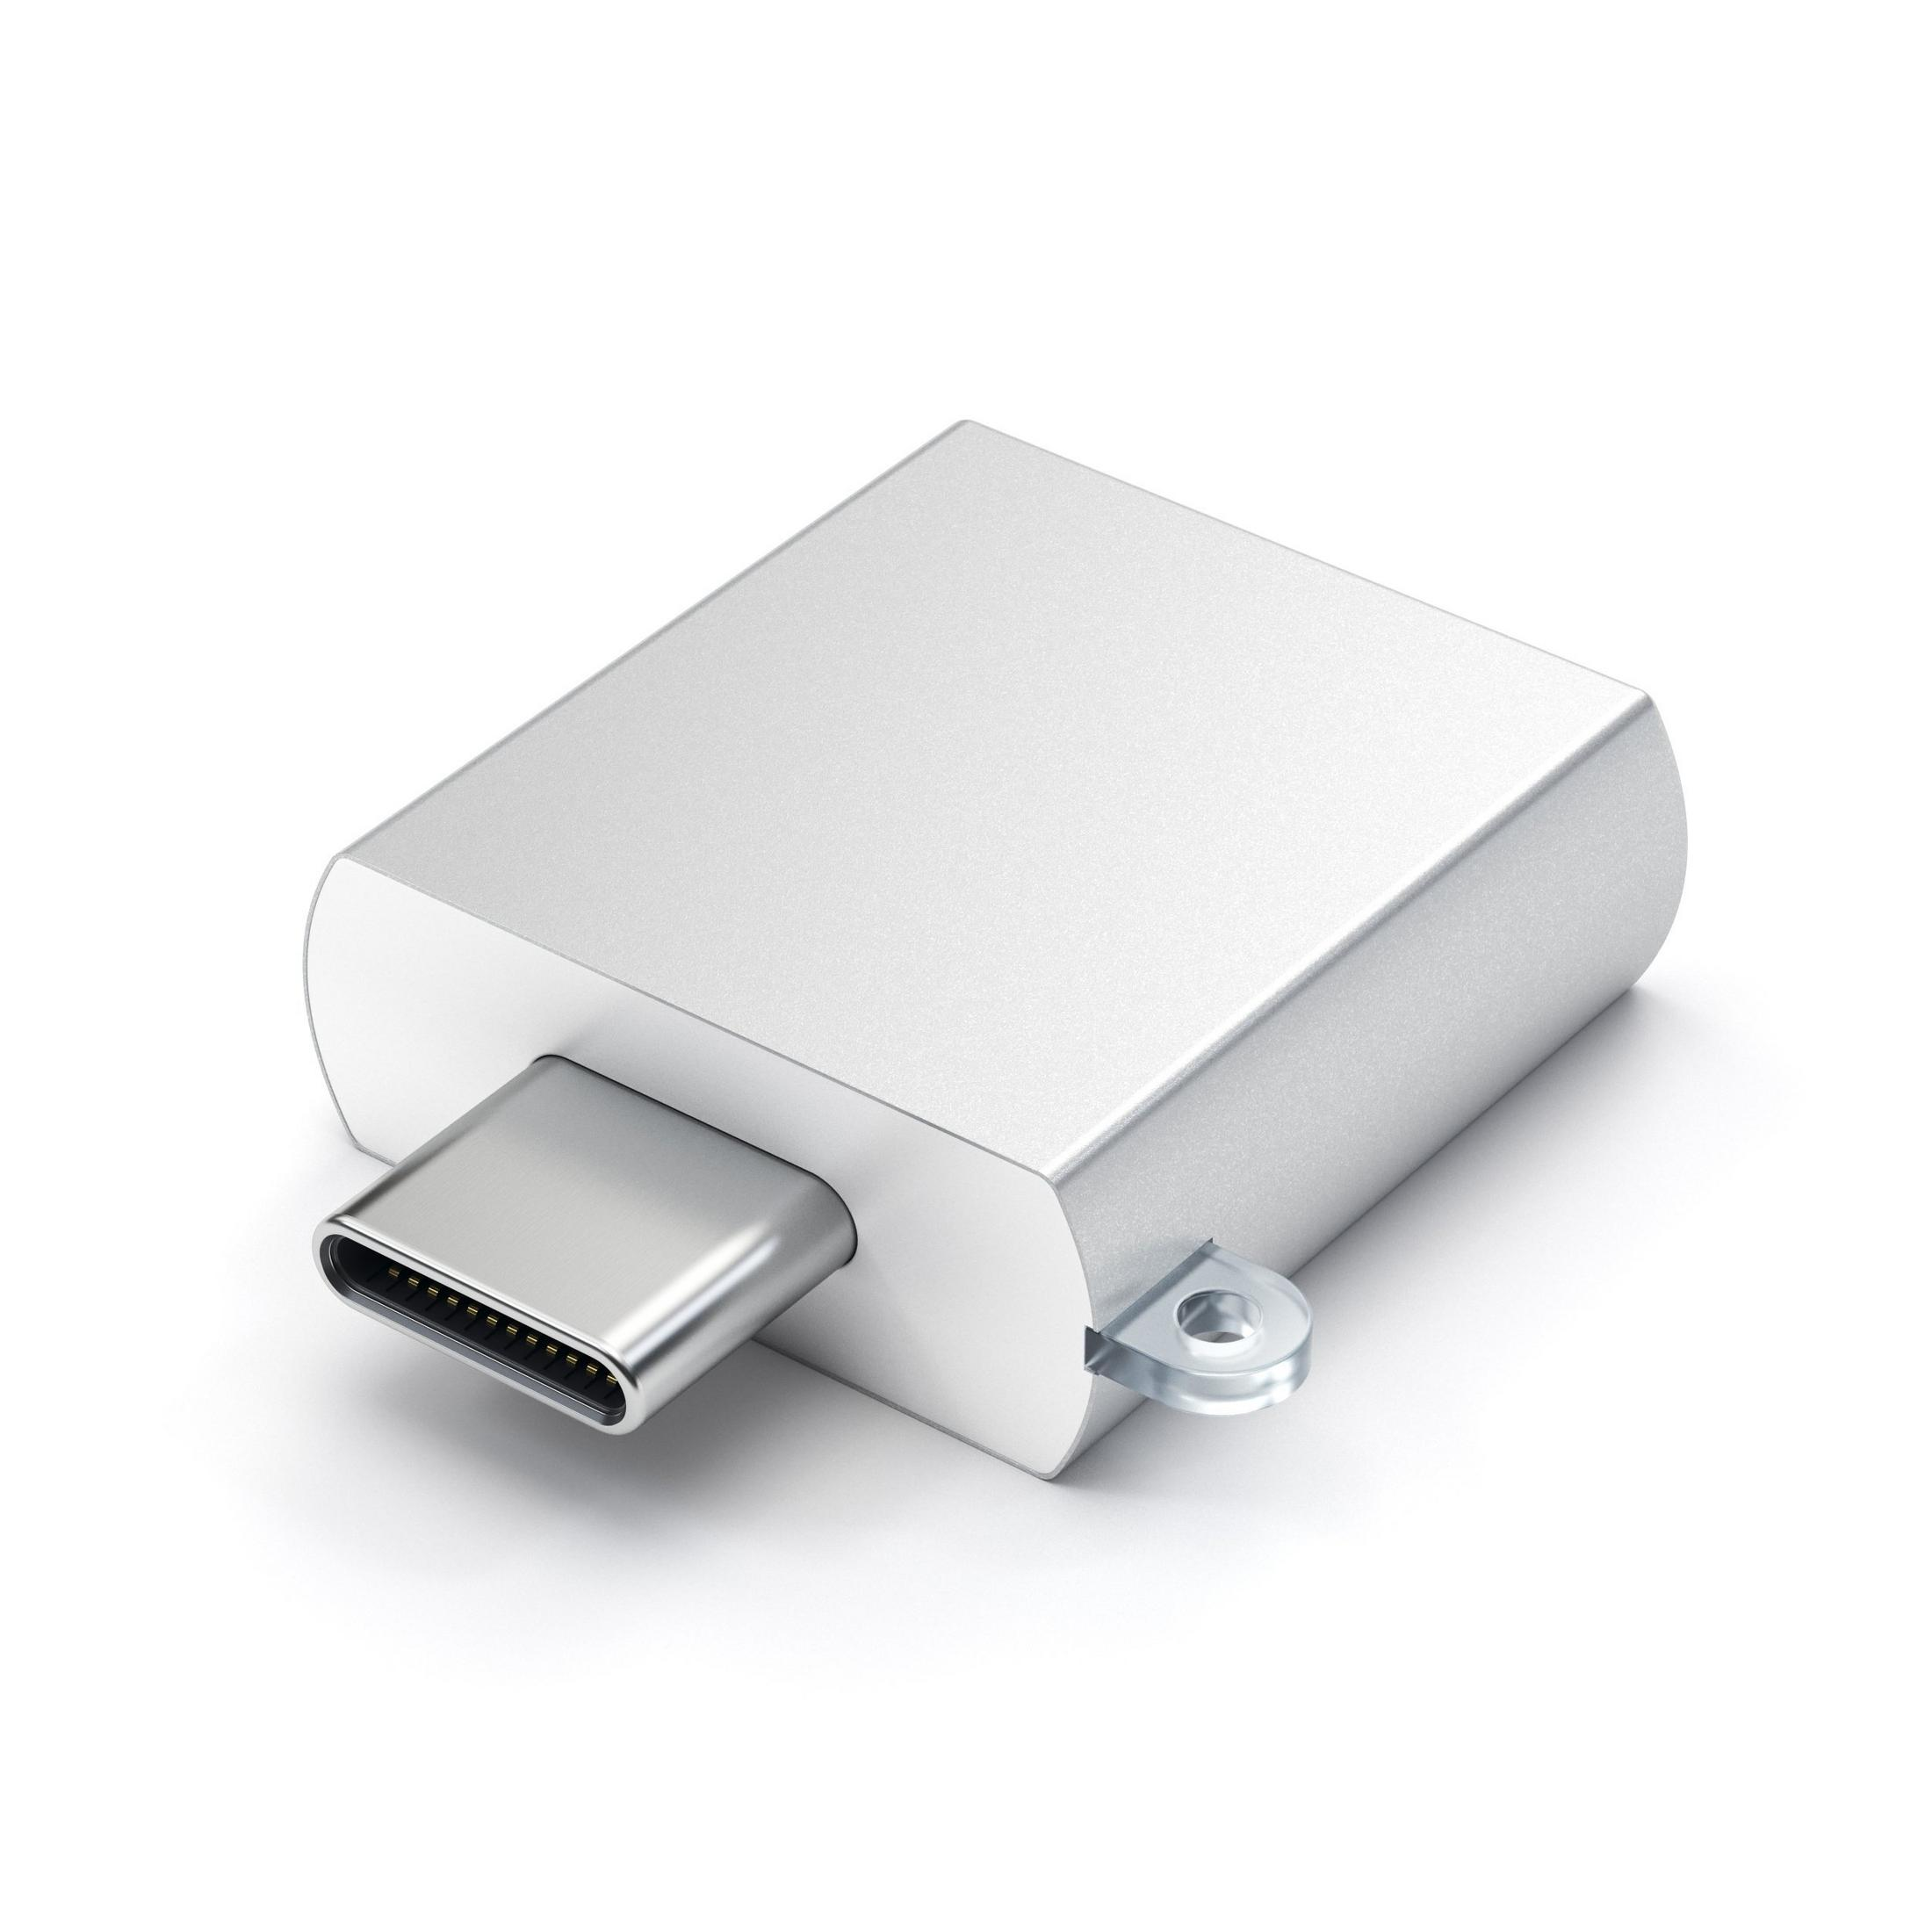 179965 USB ADAPTER SATECHI Adapter, SILBER TYPE-C Silber